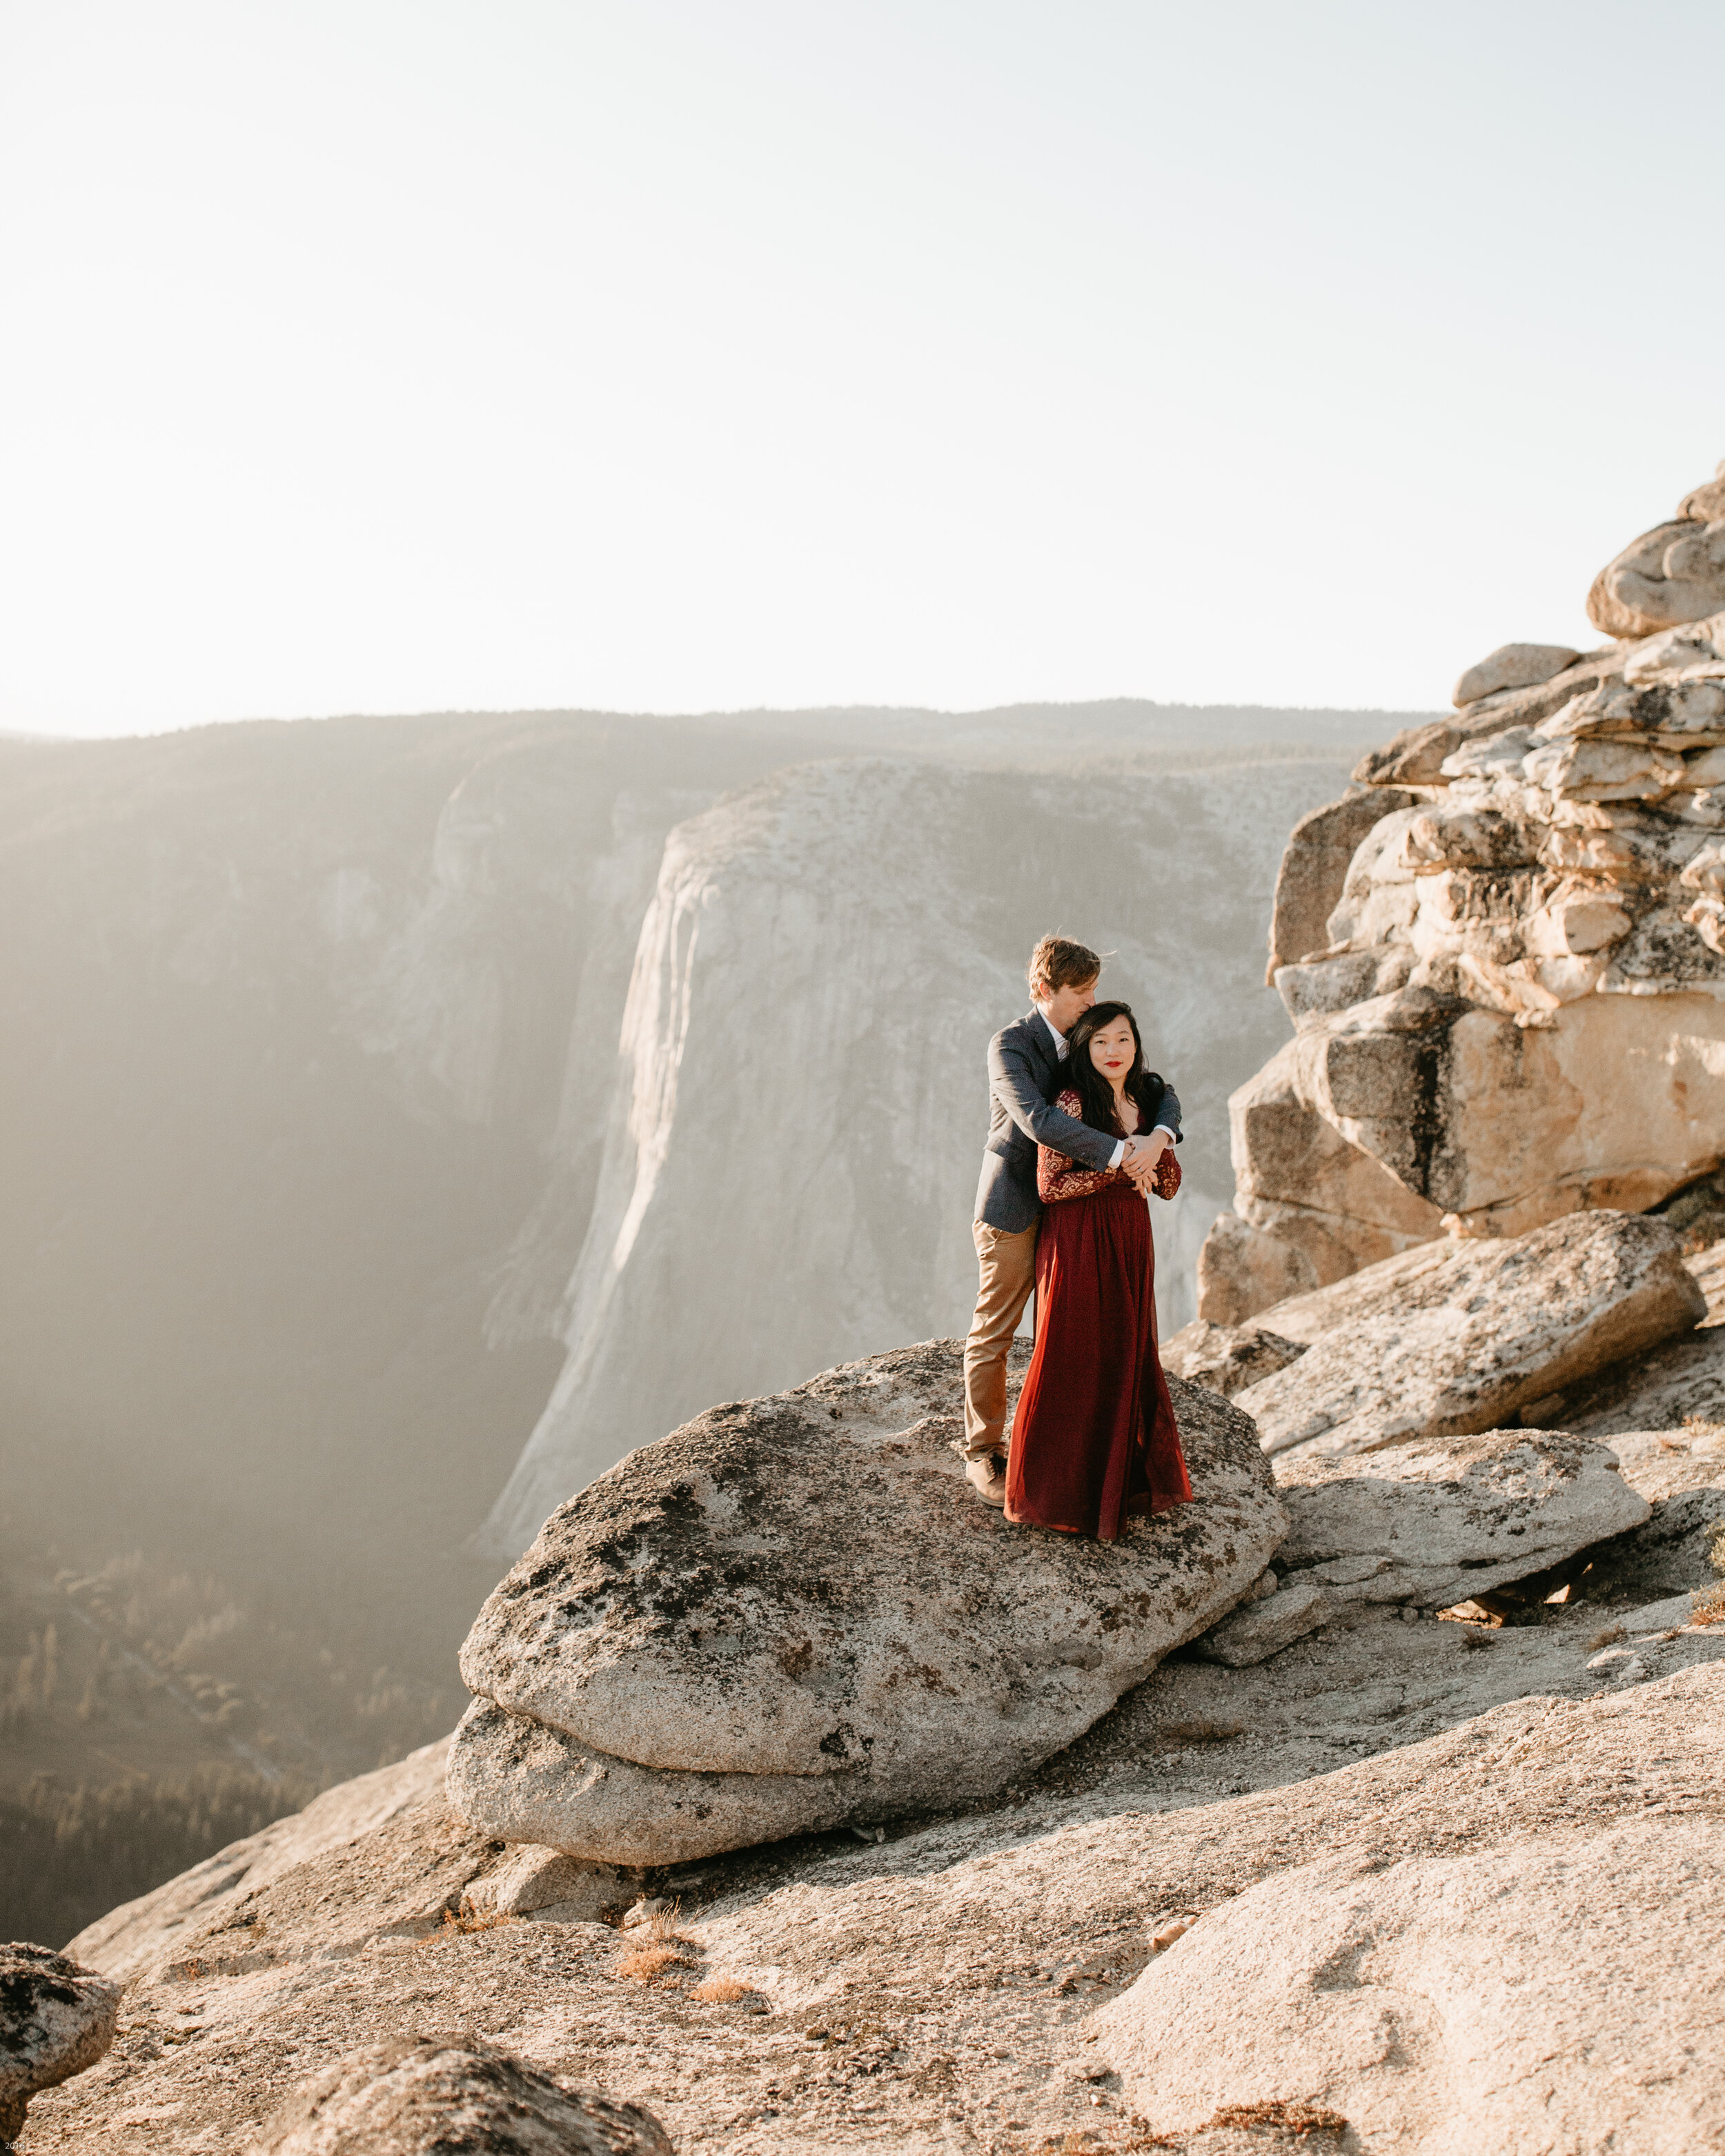 yosemite-national-park-couples-session-at-taft-point-and-yosemite-valley-yosemite-elopement-photographer-nicole-daacke-photography-135.jpg